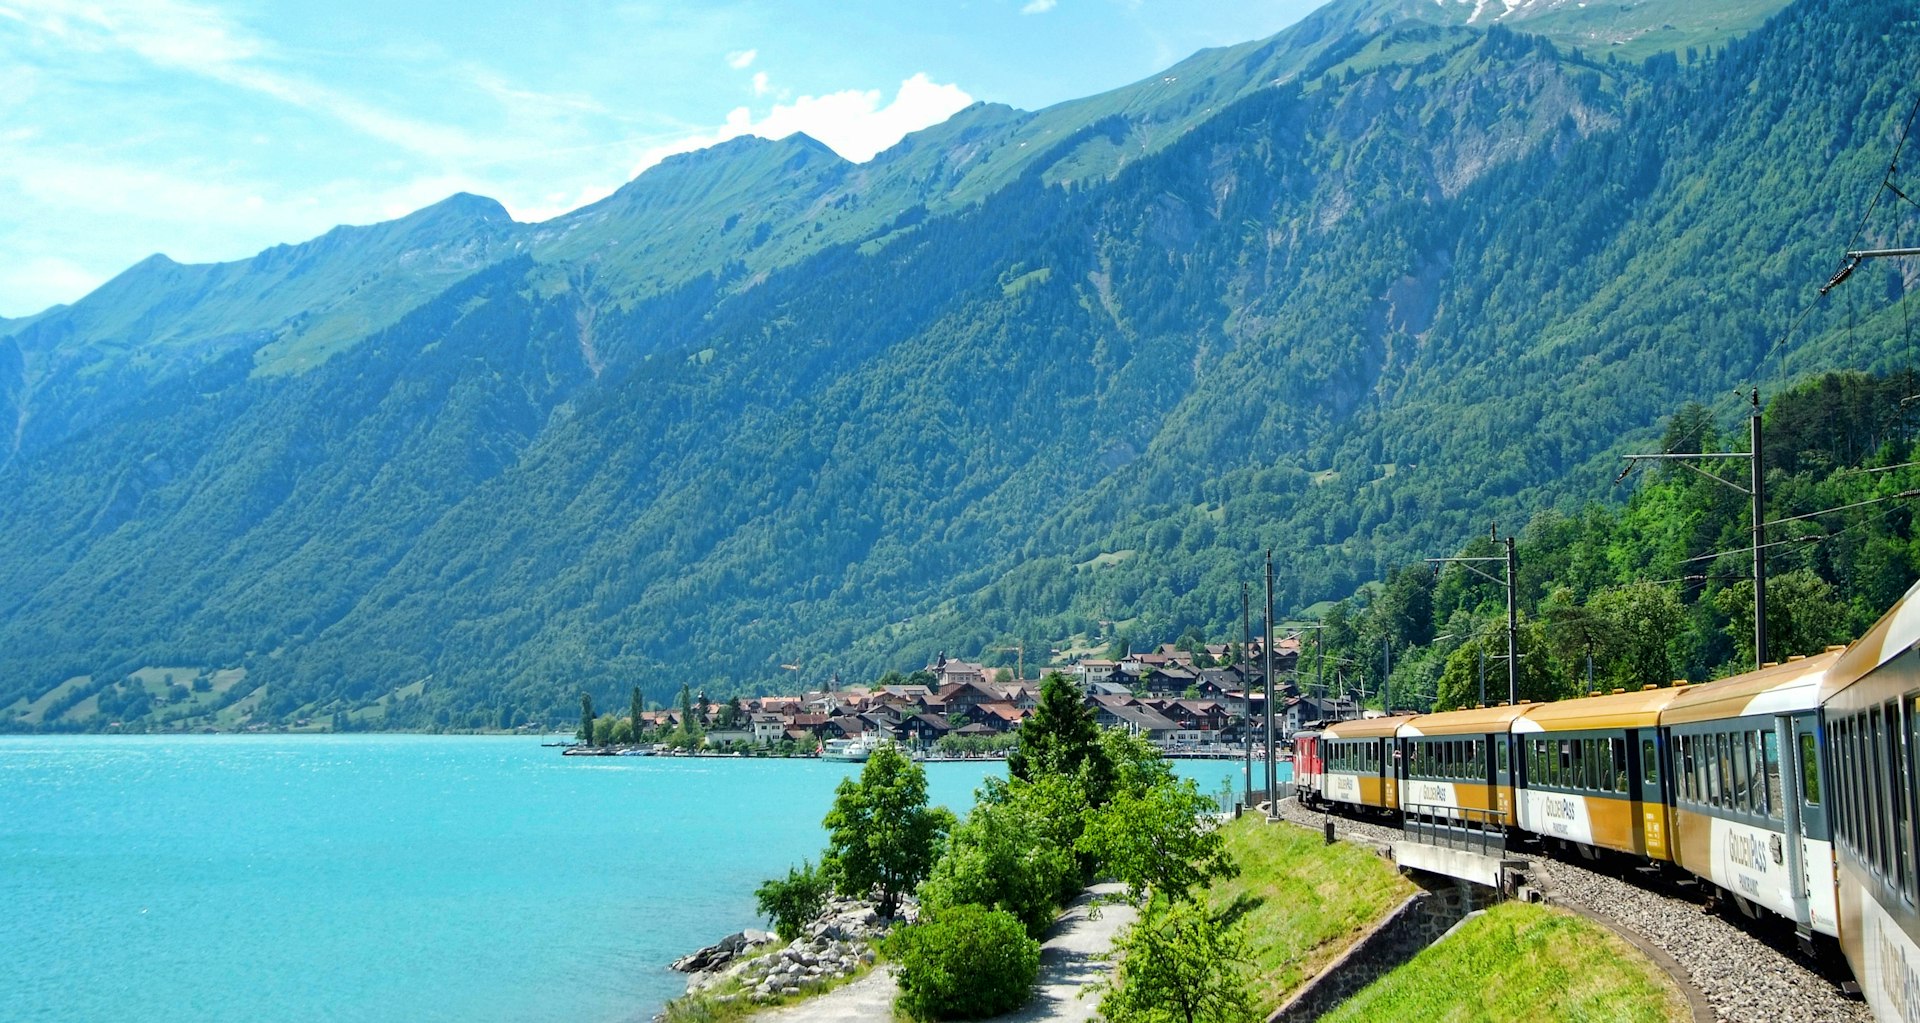 Wonderful view of houses and mountains at Lake Brienz, east of Interlaken from a window of Golden Pass Express train, destined for Lucerne, Switzerland